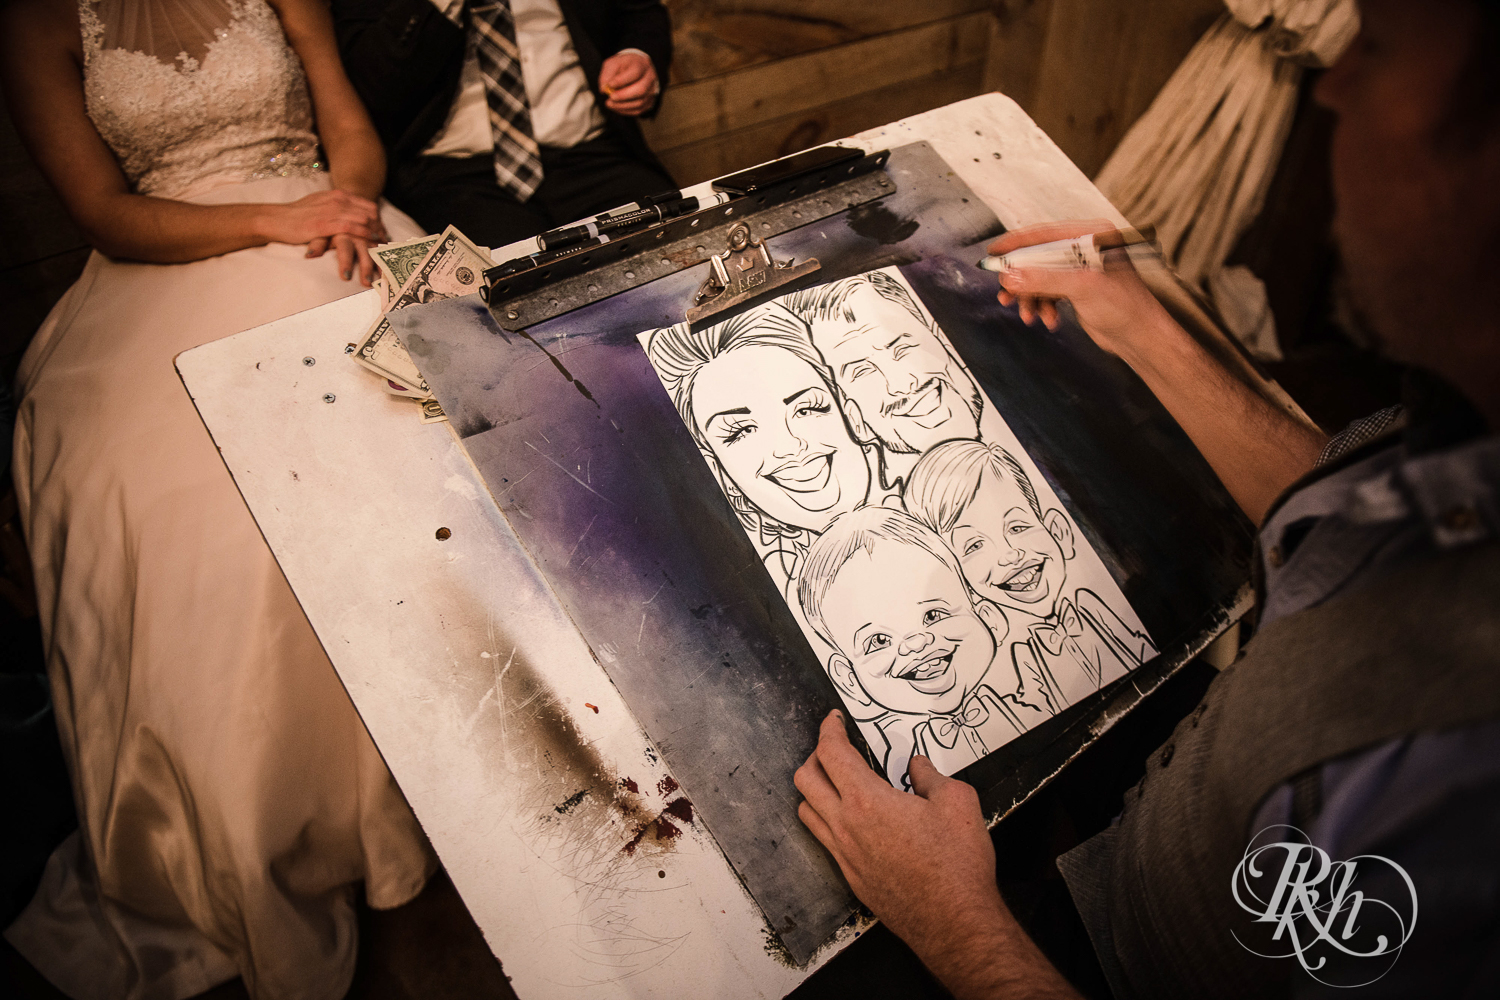 Bride and groom get caricature during wedding reception with their sons at Creekside Farm in Rush City, Minnesota.